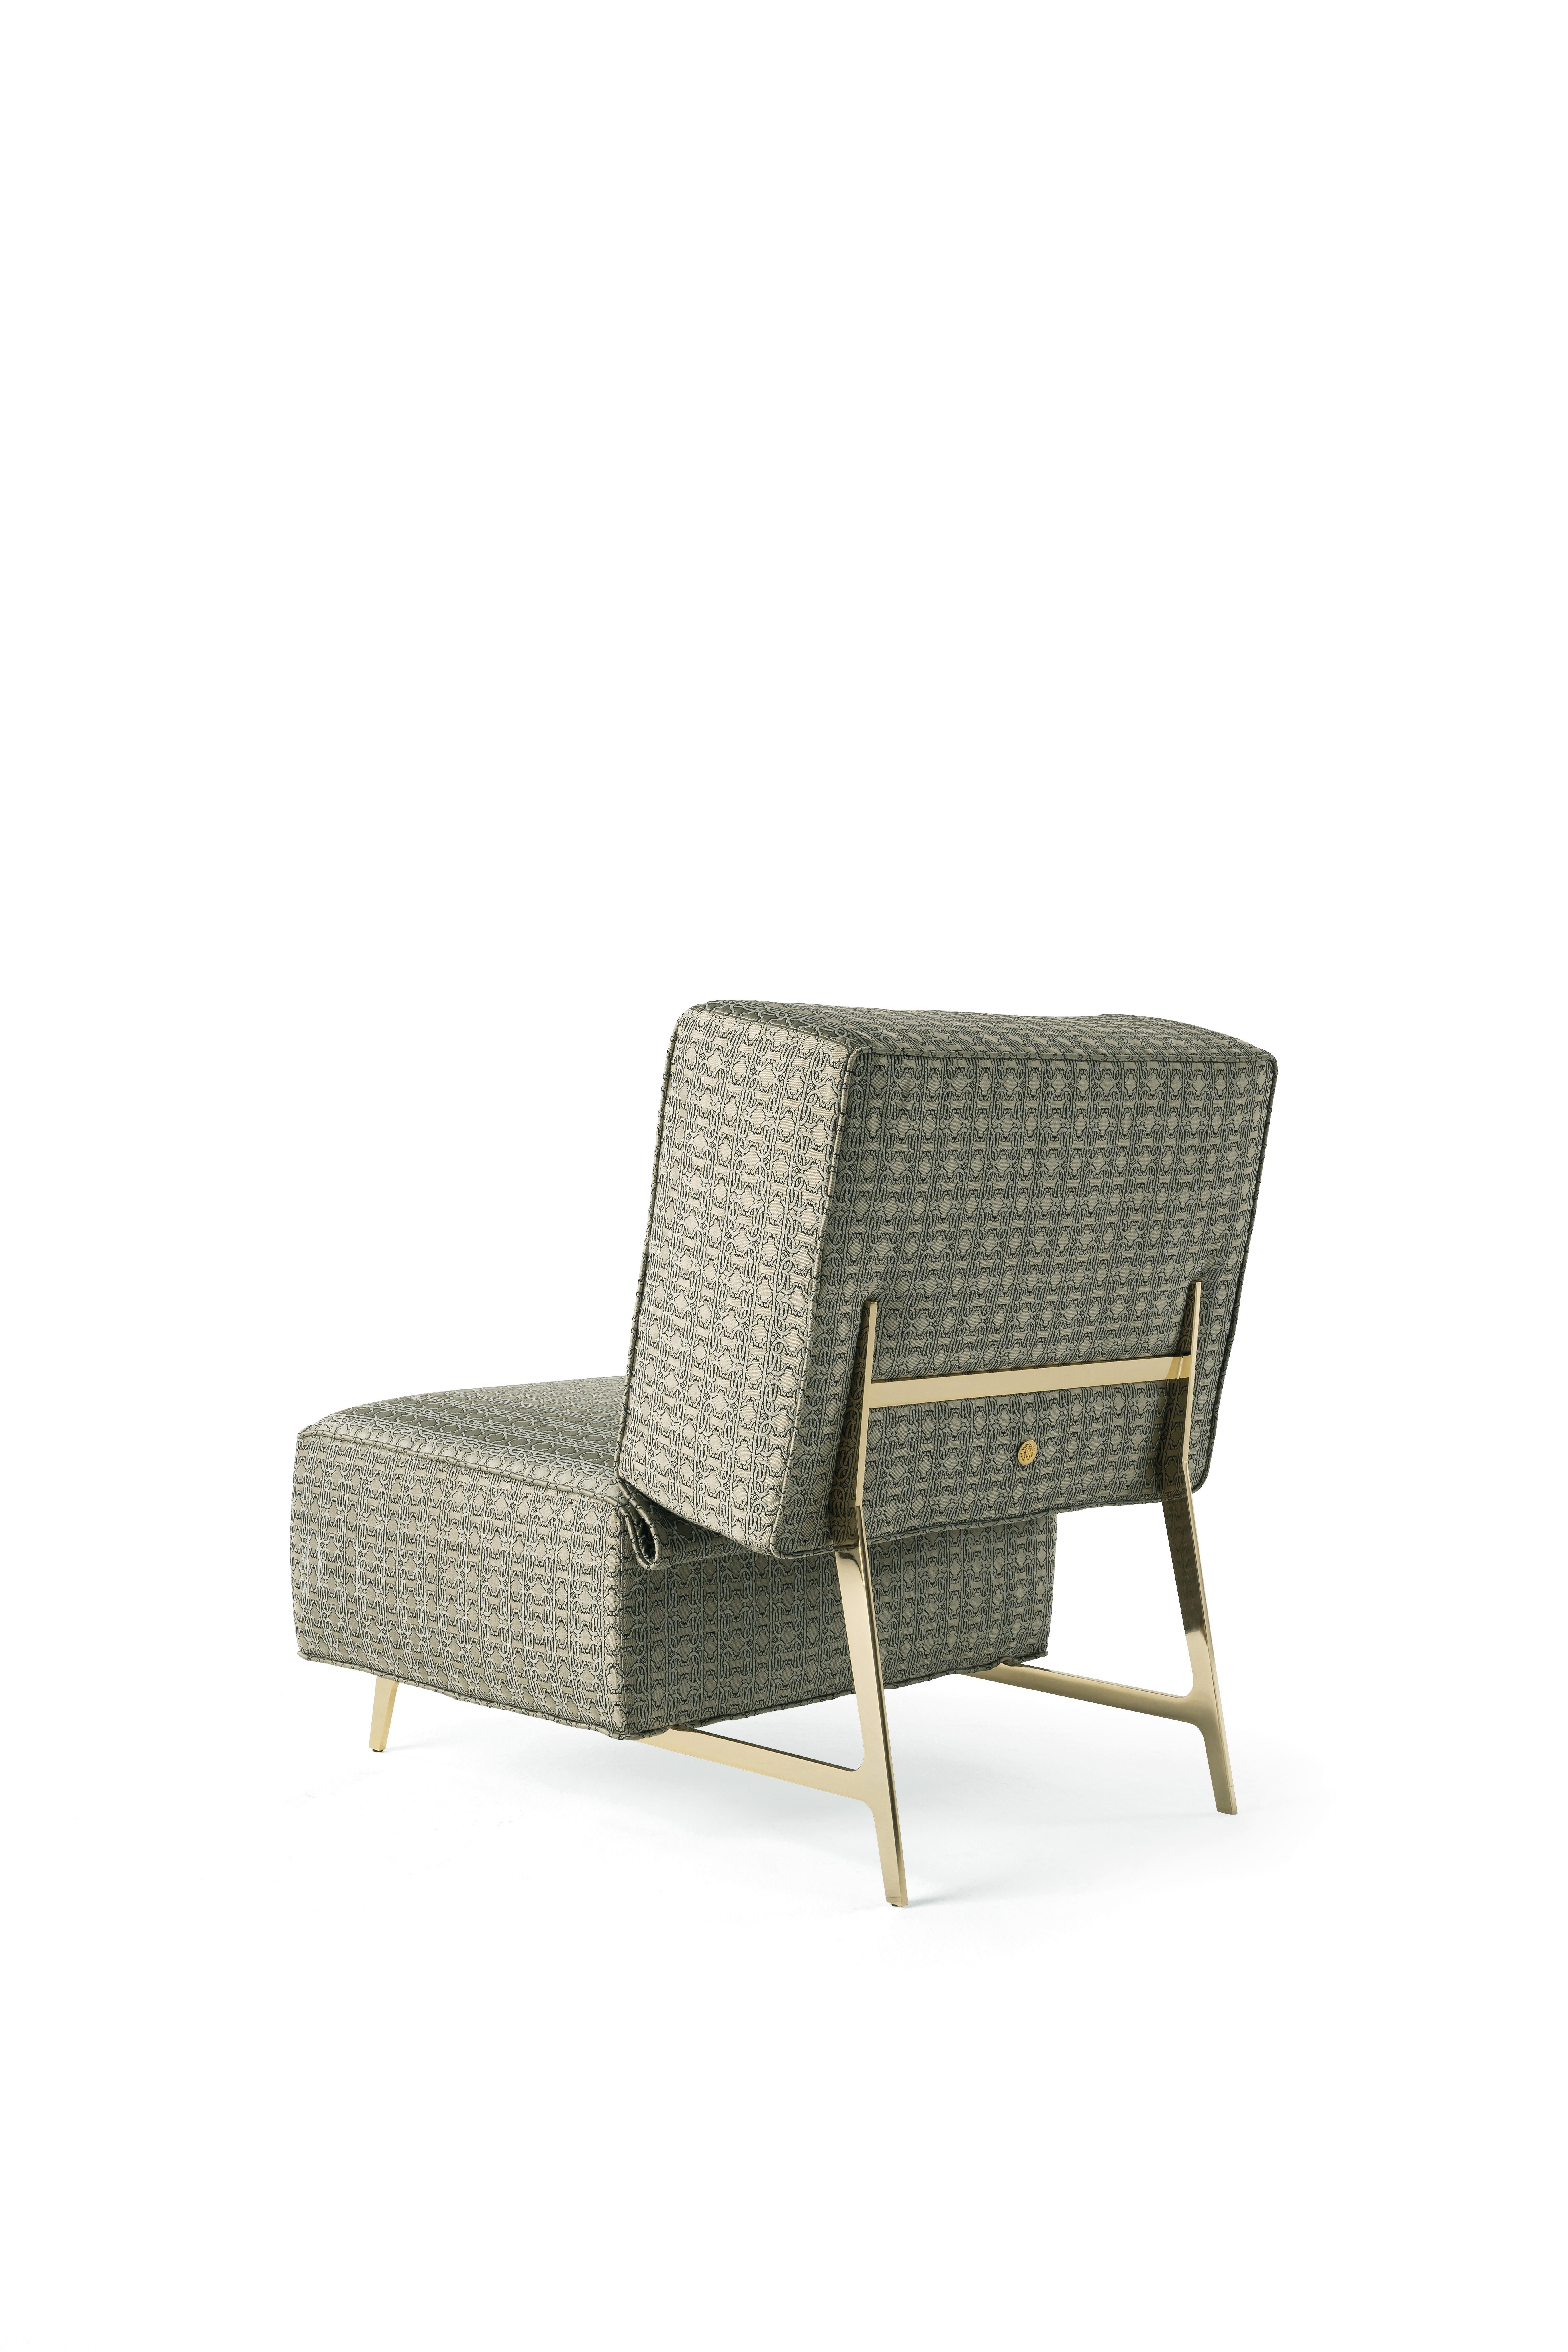 21st Century Davis Armchair in Monogram Fabric by Roberto Cavalli Home Interiors In New Condition For Sale In Cantù, Lombardia